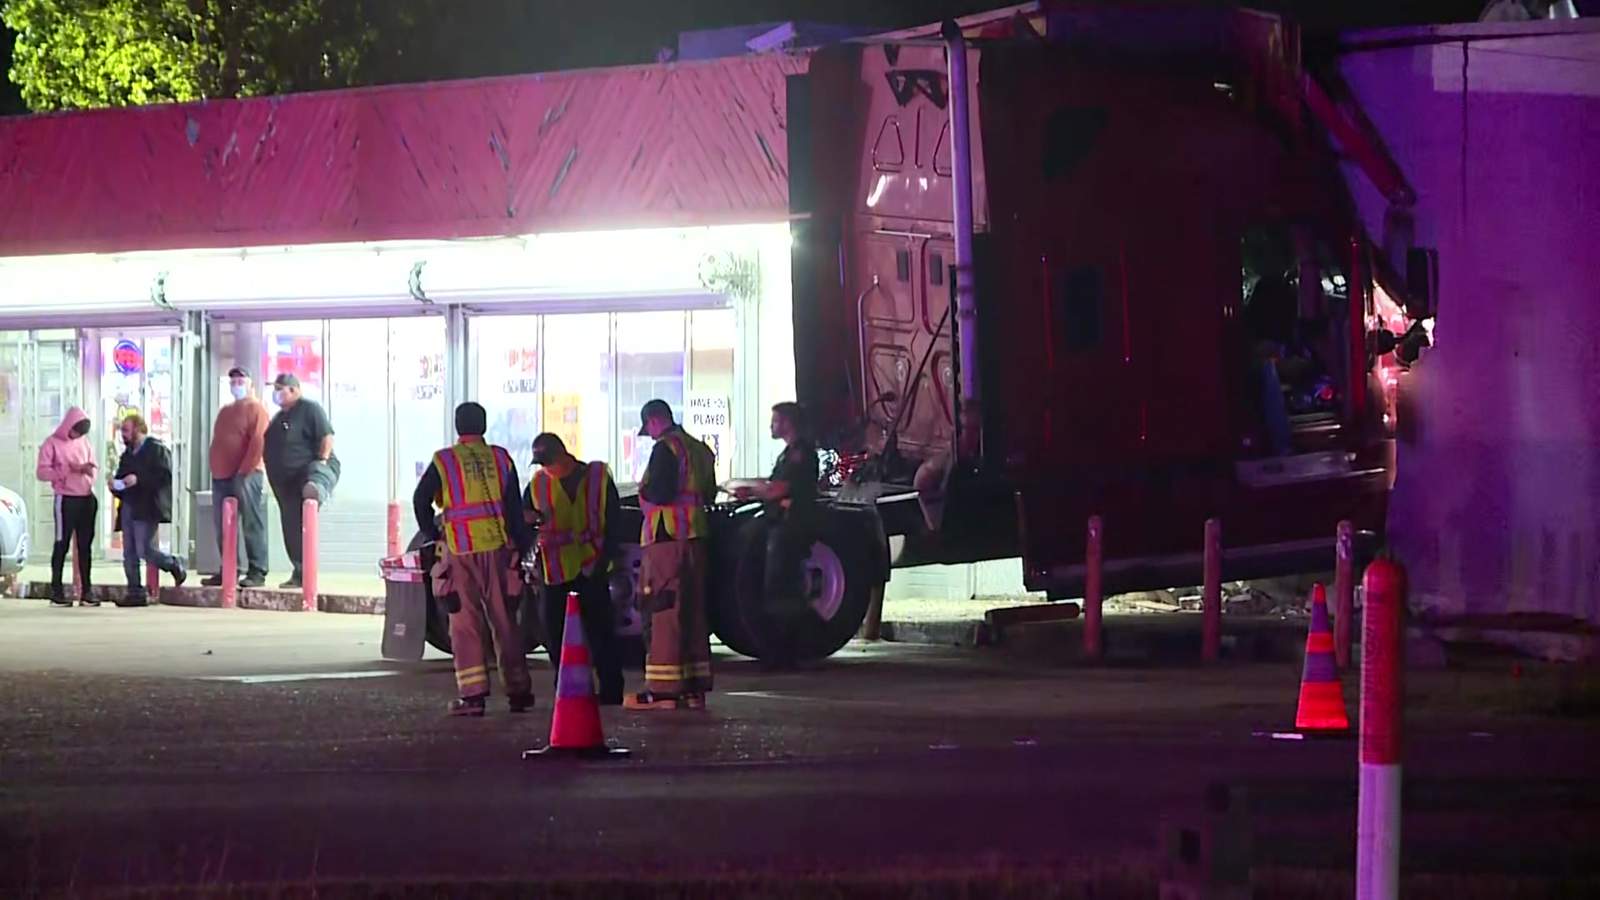 WATCH: Big rig cab slams into store after head-on crash with another big rig